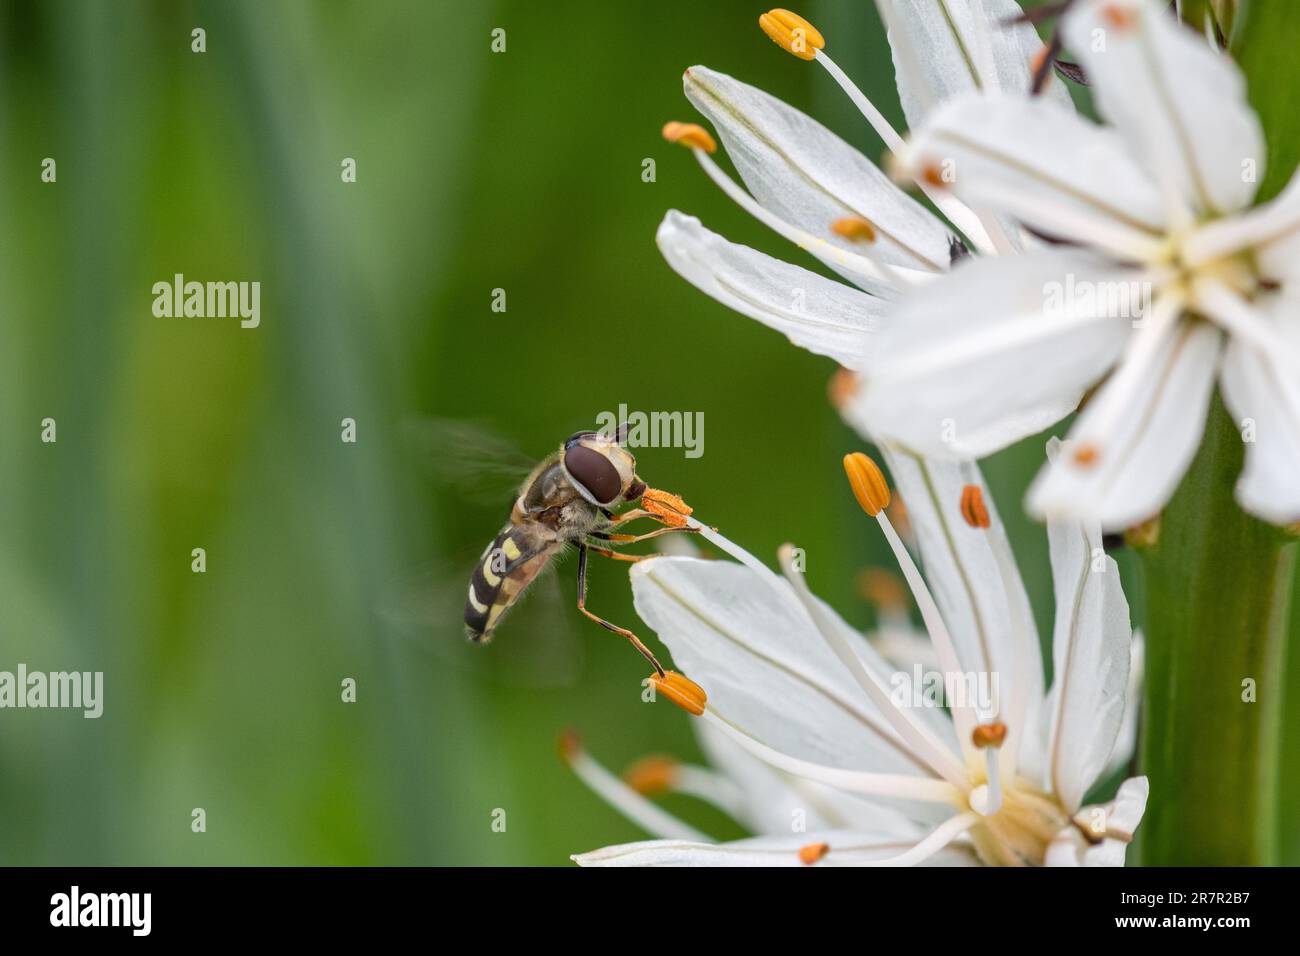 A hoverfly nectaring on an Asphodelus albus flower, common name white asphodel, in a wildflower meadow, Italy, Europe Stock Photo